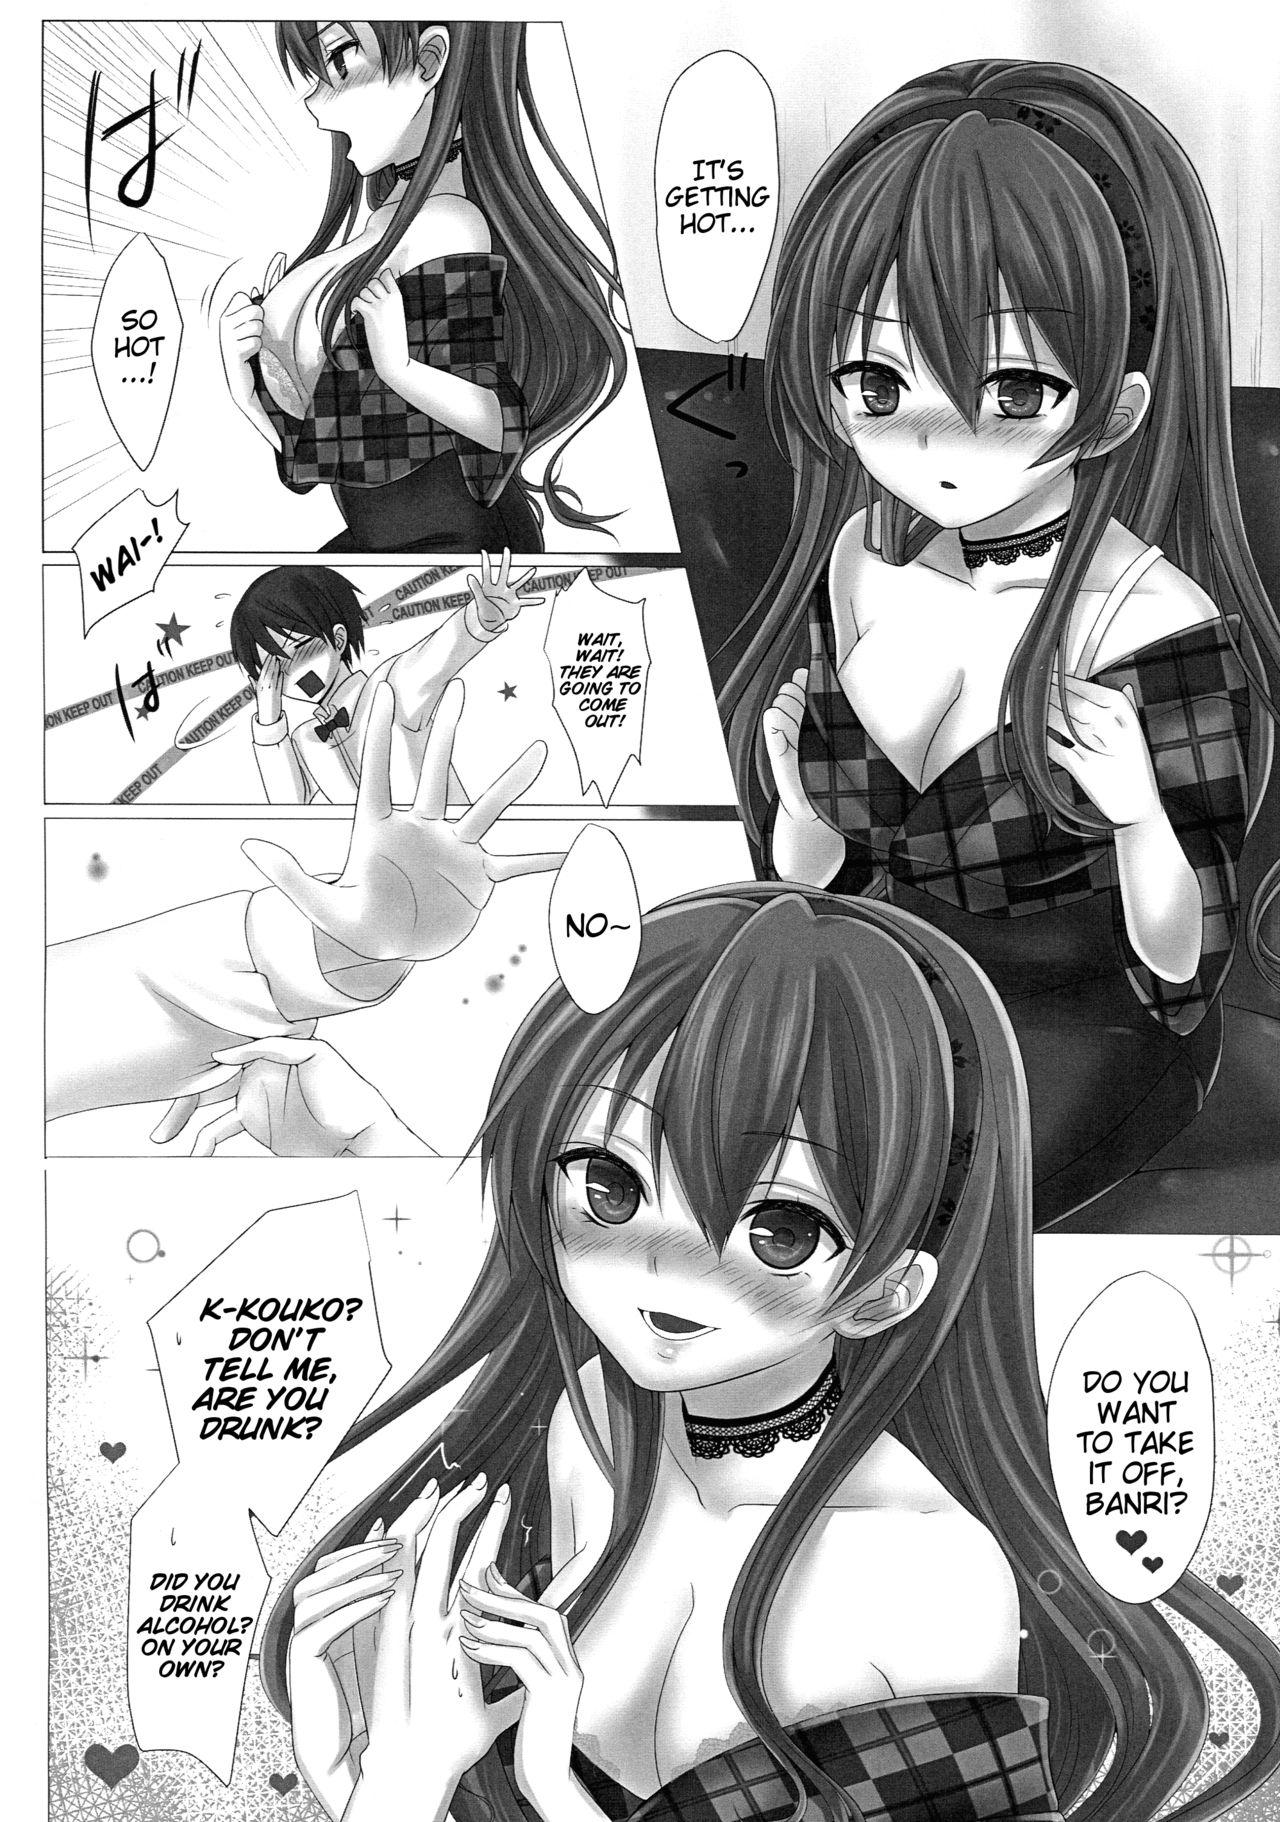 Latin KISS ME TOUCH ME - Golden time Toys - Page 5